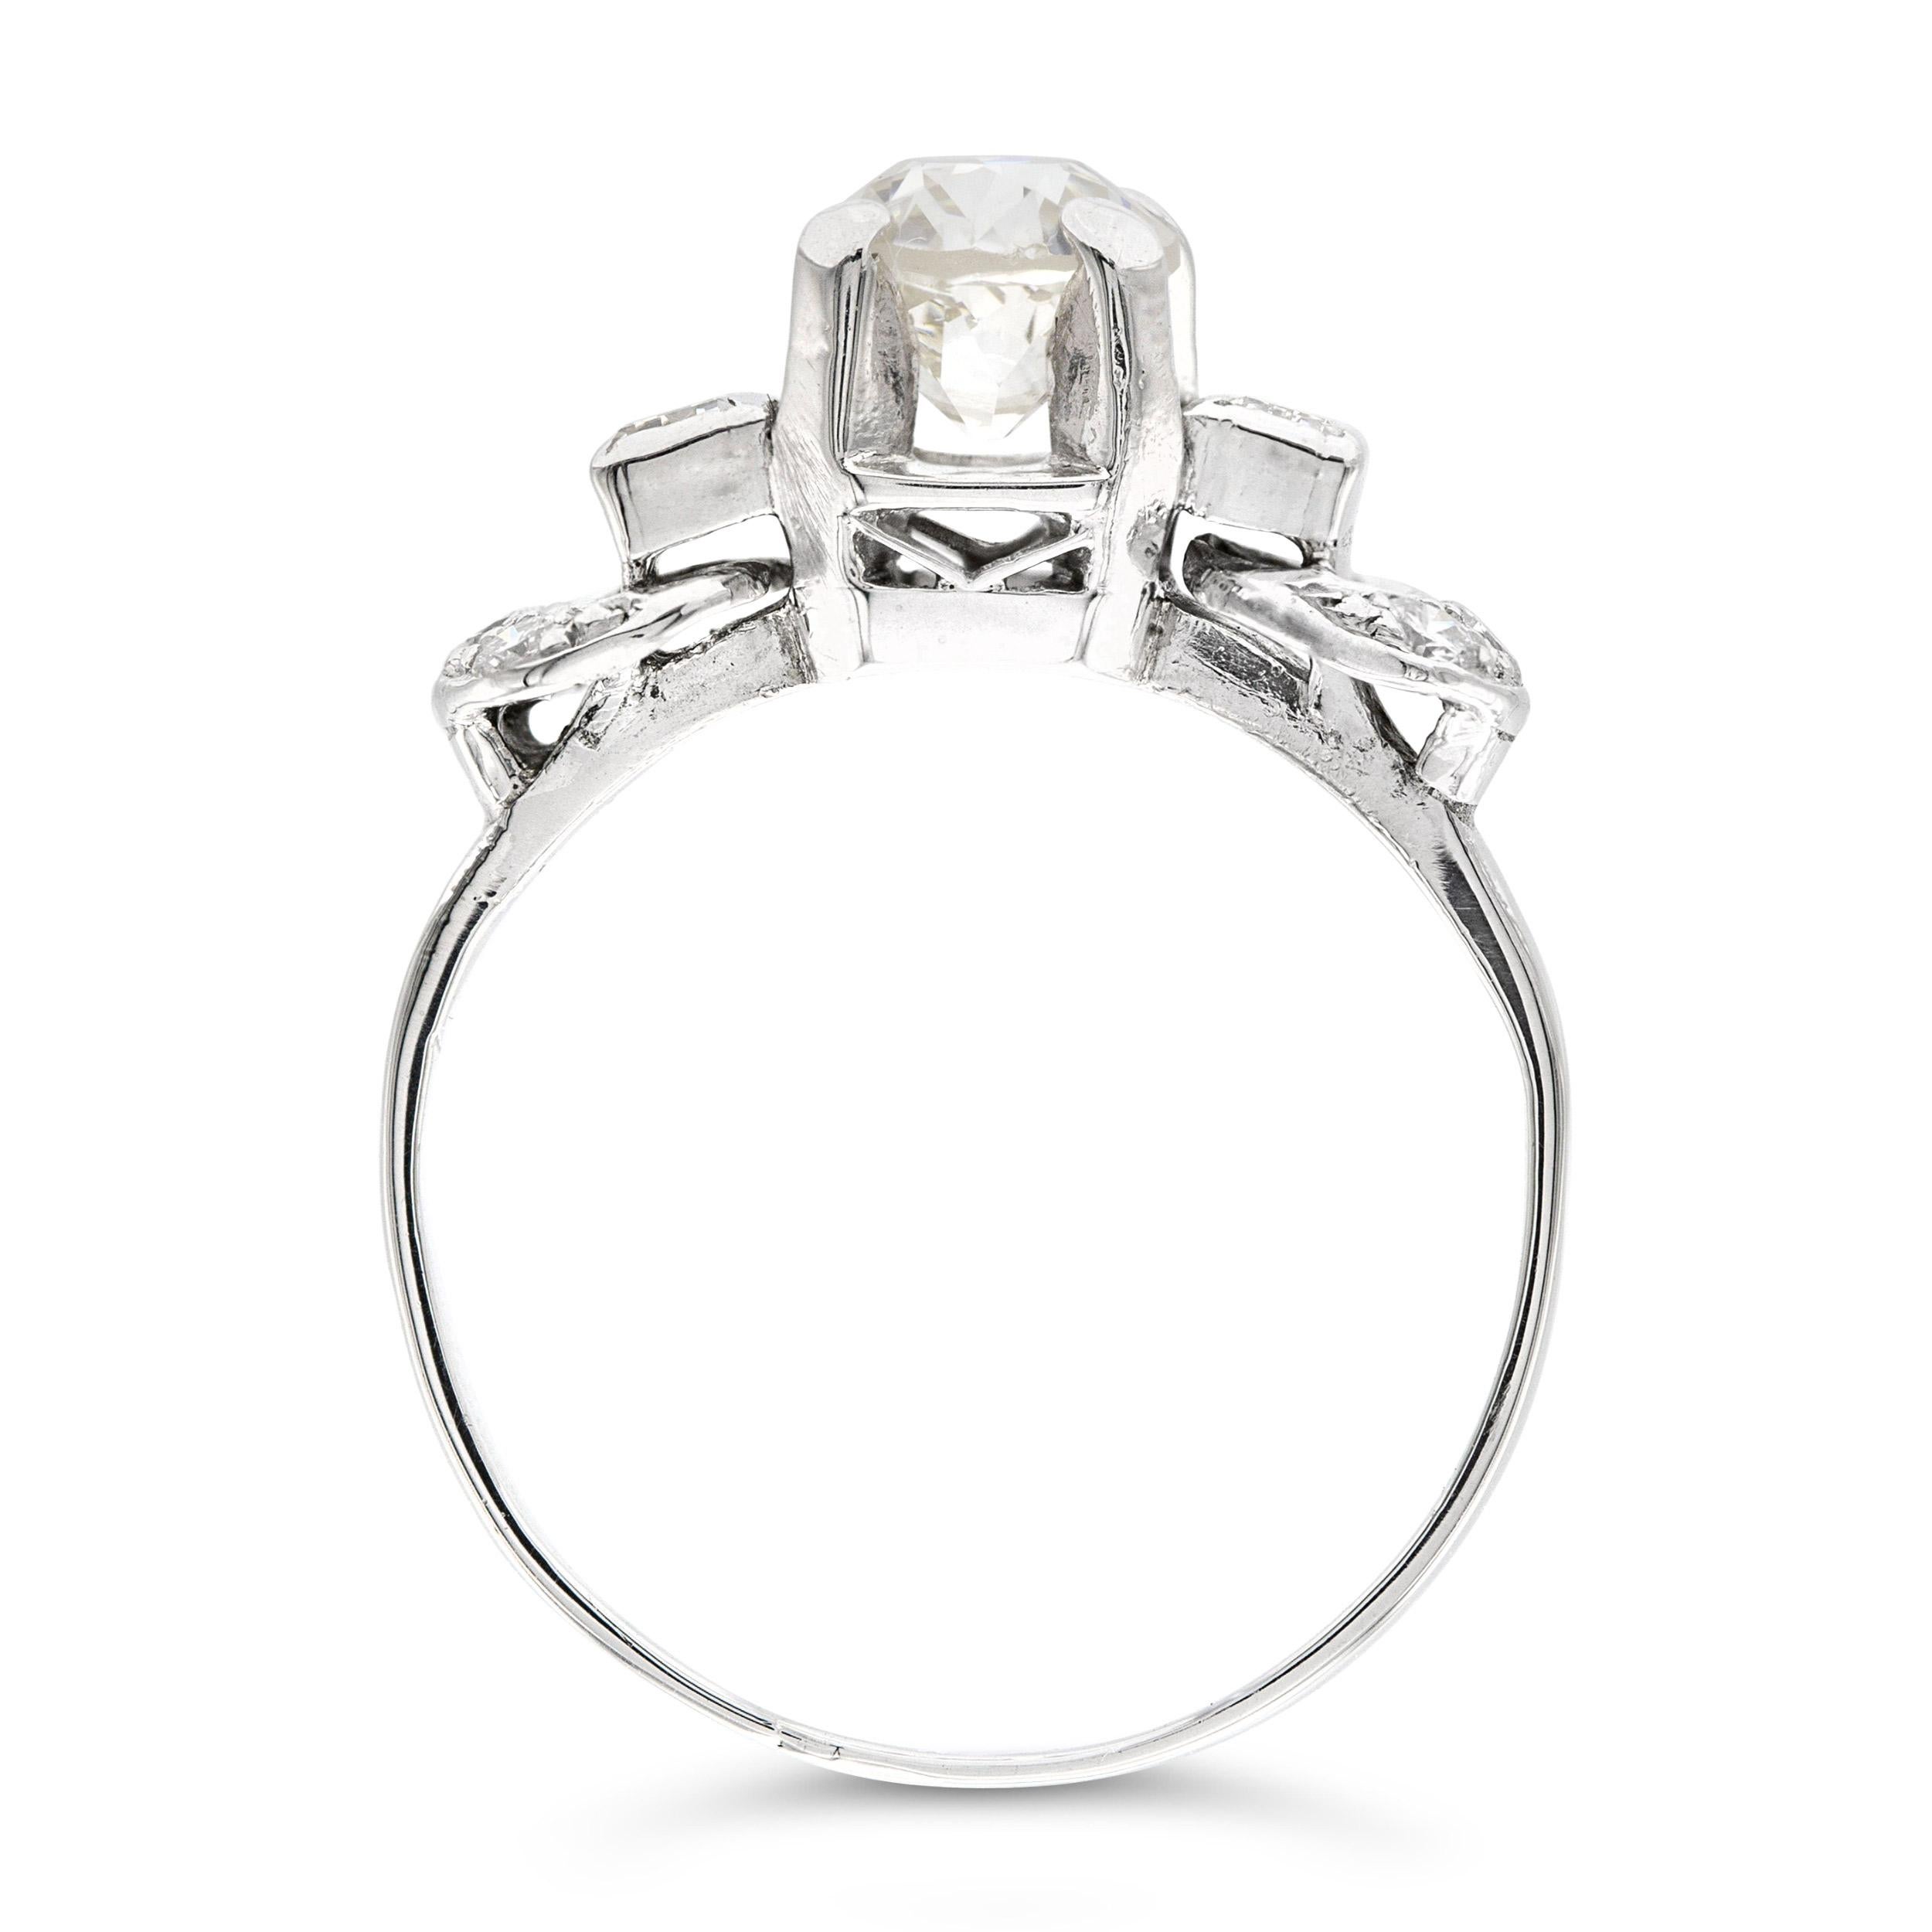 Art Deco 0.72 Ct. Diamond Engagement Ring J SI2 in Platinum In Good Condition For Sale In New York, NY